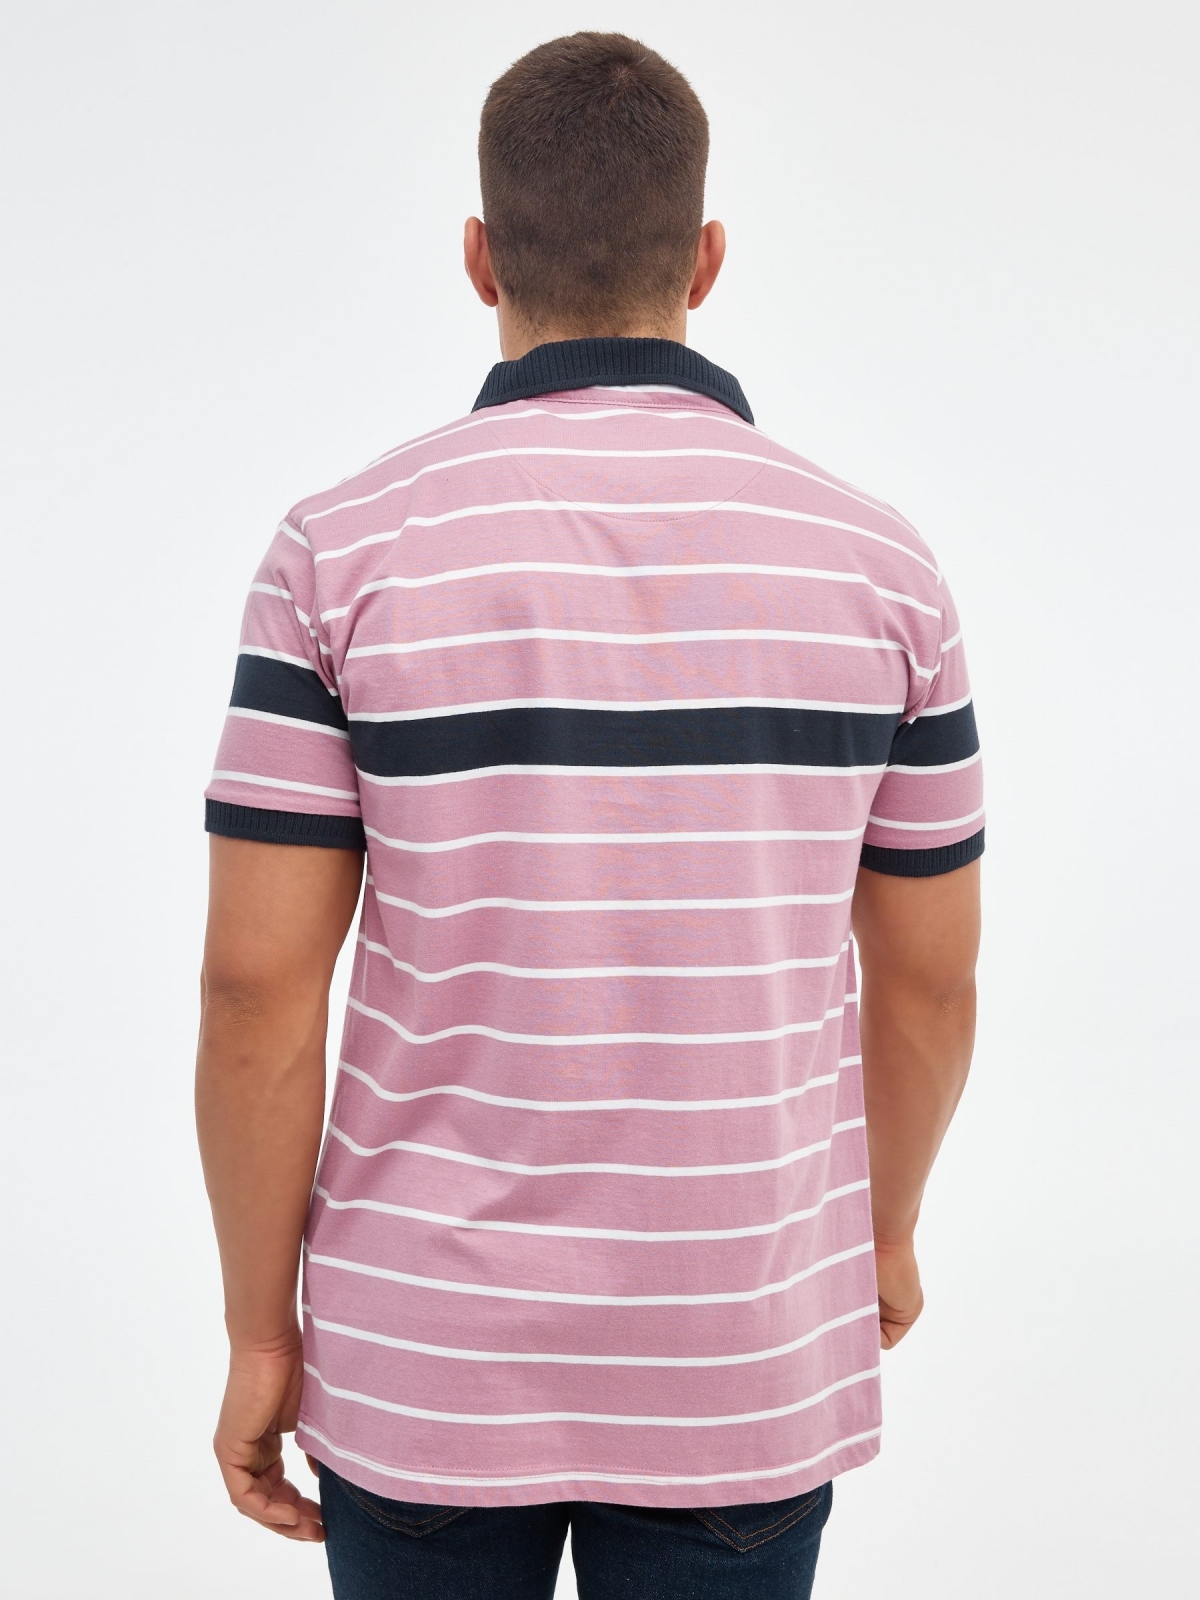 Contrast striped polo shirt purple middle back view